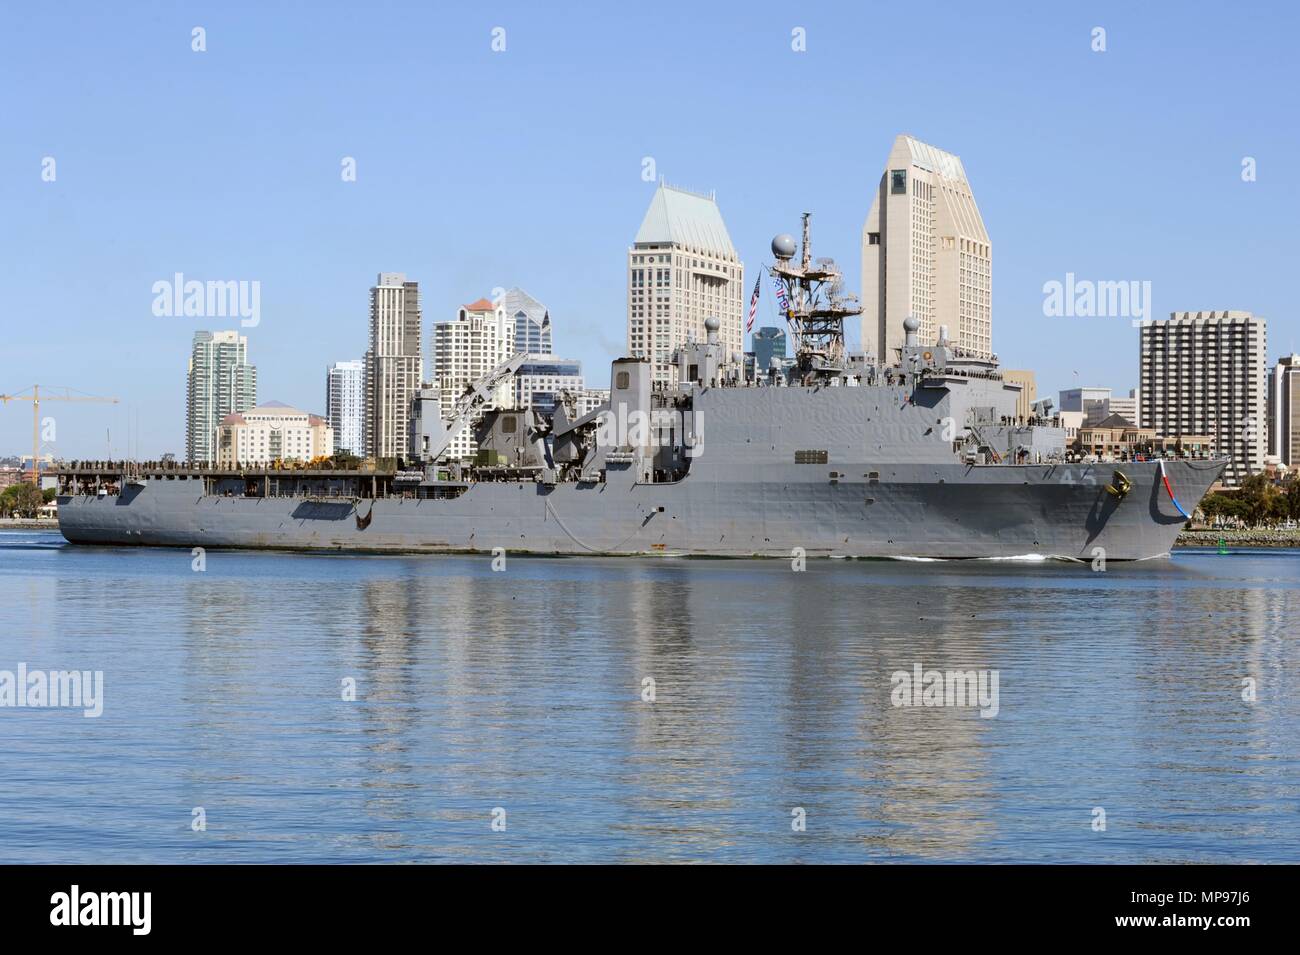 The U.S. Navy Whidbey Island-class amphibious dock landing ship USS Comstock arrives at the Naval Base San Diego February 25, 2015 in San Diego, California.   (photo by Rosalie Chang via Planetpix) Stock Photo